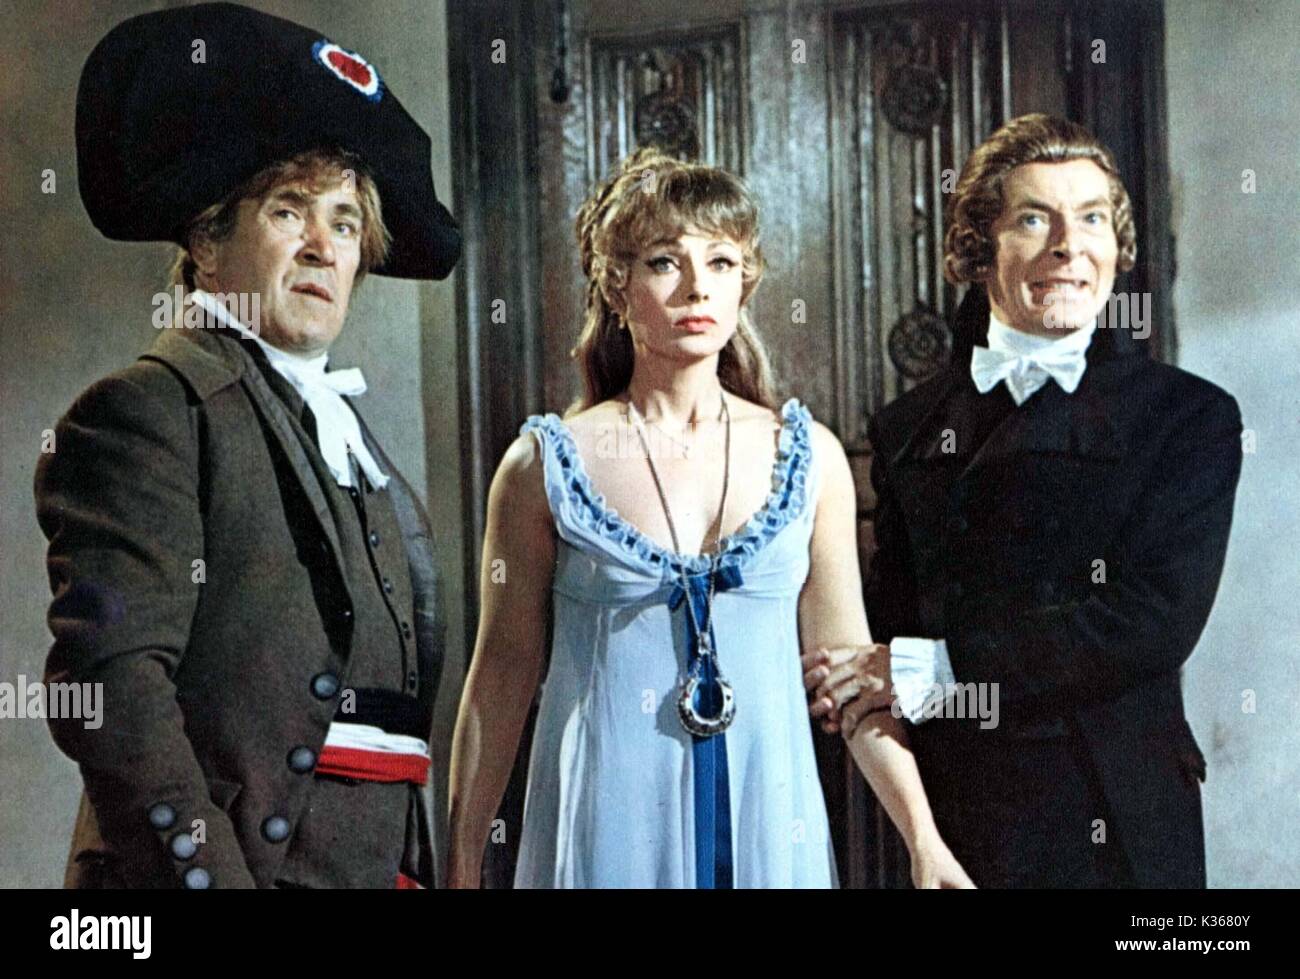 DON'T LOSE YOUR HEAD (BR 1967) PETER BUTTERWORTH, DANY ROBIN, KENNETH WILLIAMS     Date: 1967 Stock Photo